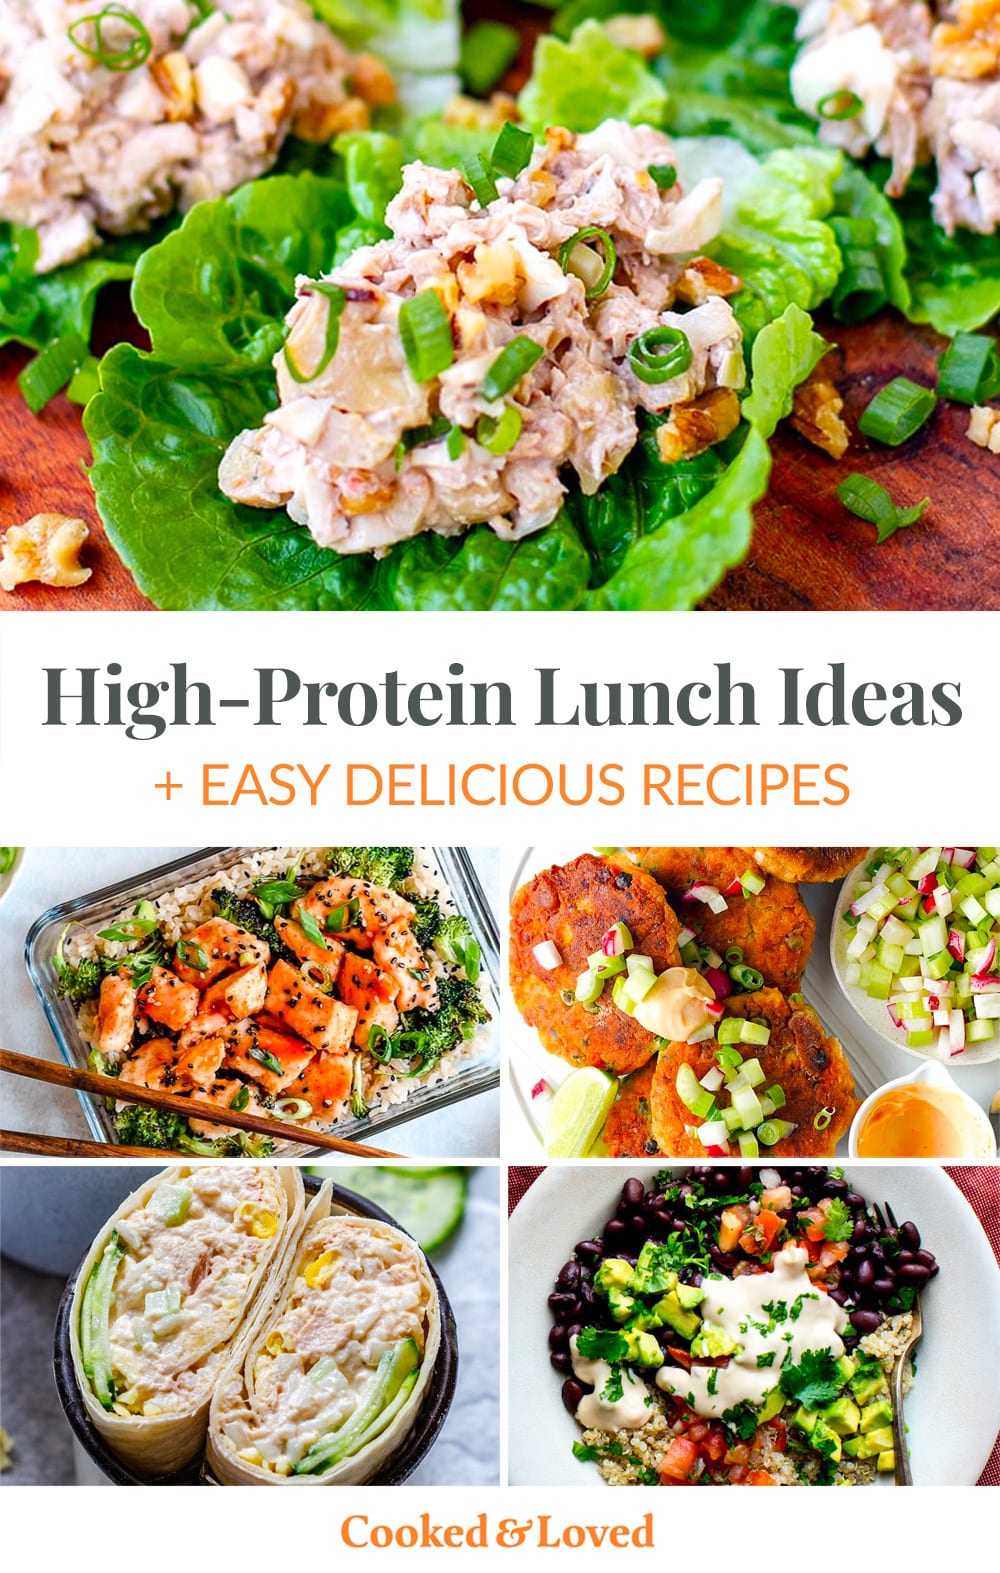 Delicious Healthy Lunch Ideas (30+ Meal Prep Ideas) - Fit Foodie Finds